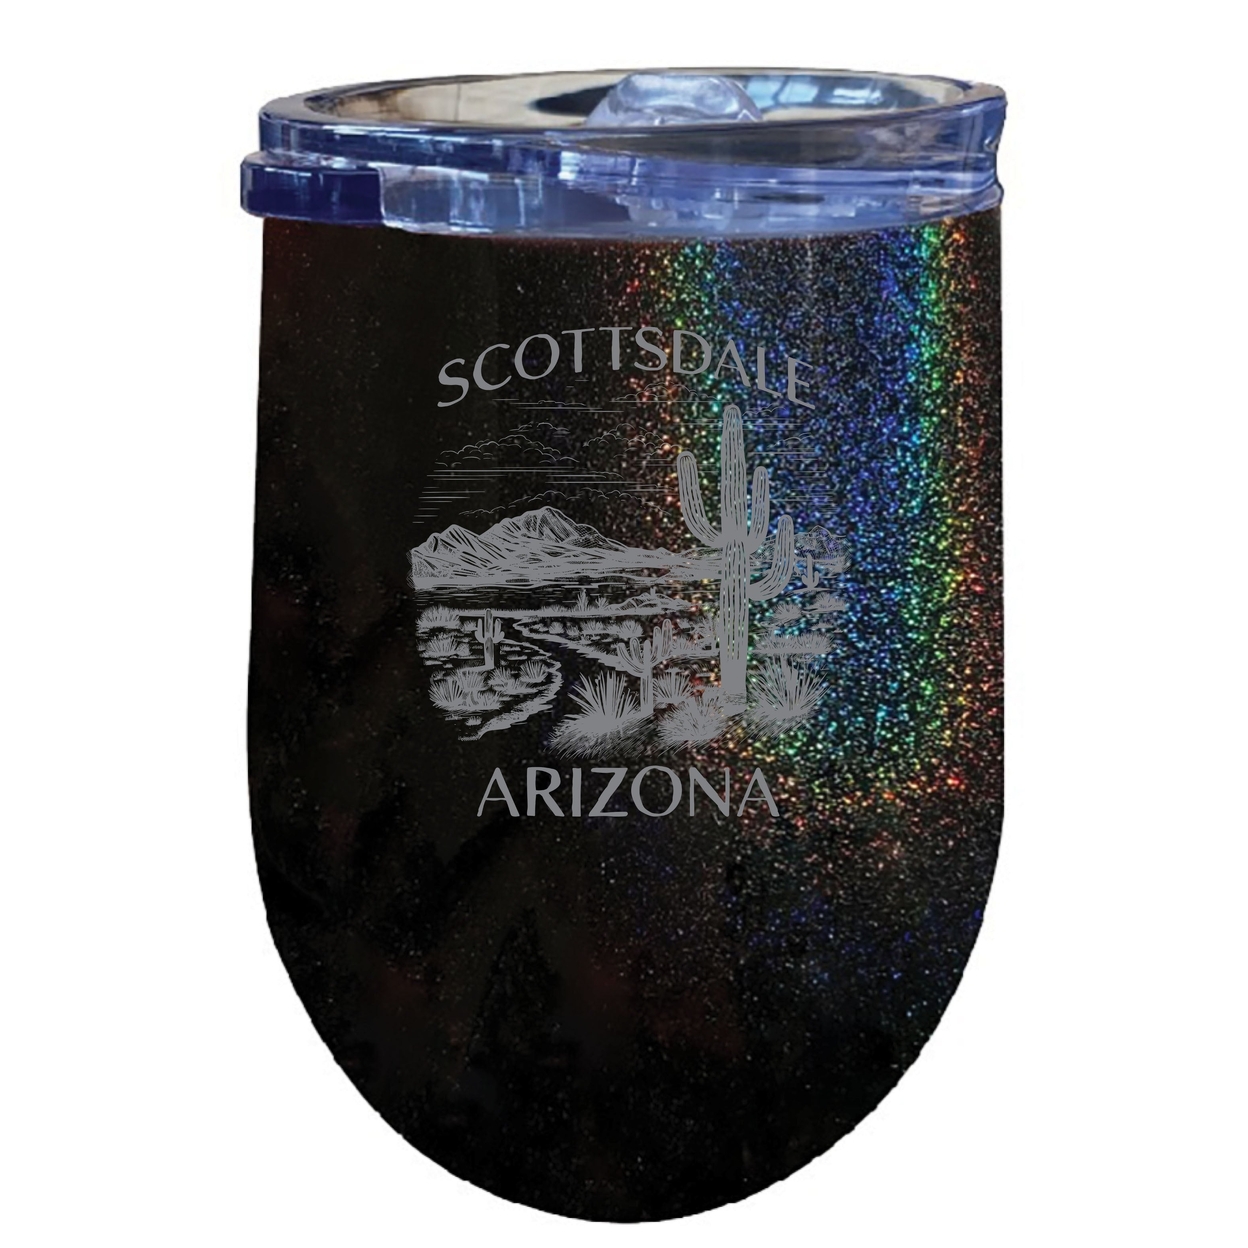 Scottsdale Arizona Souvenir 12 Oz Engraved Insulated Wine Stainless Steel Tumbler - Coral,,2-Pack